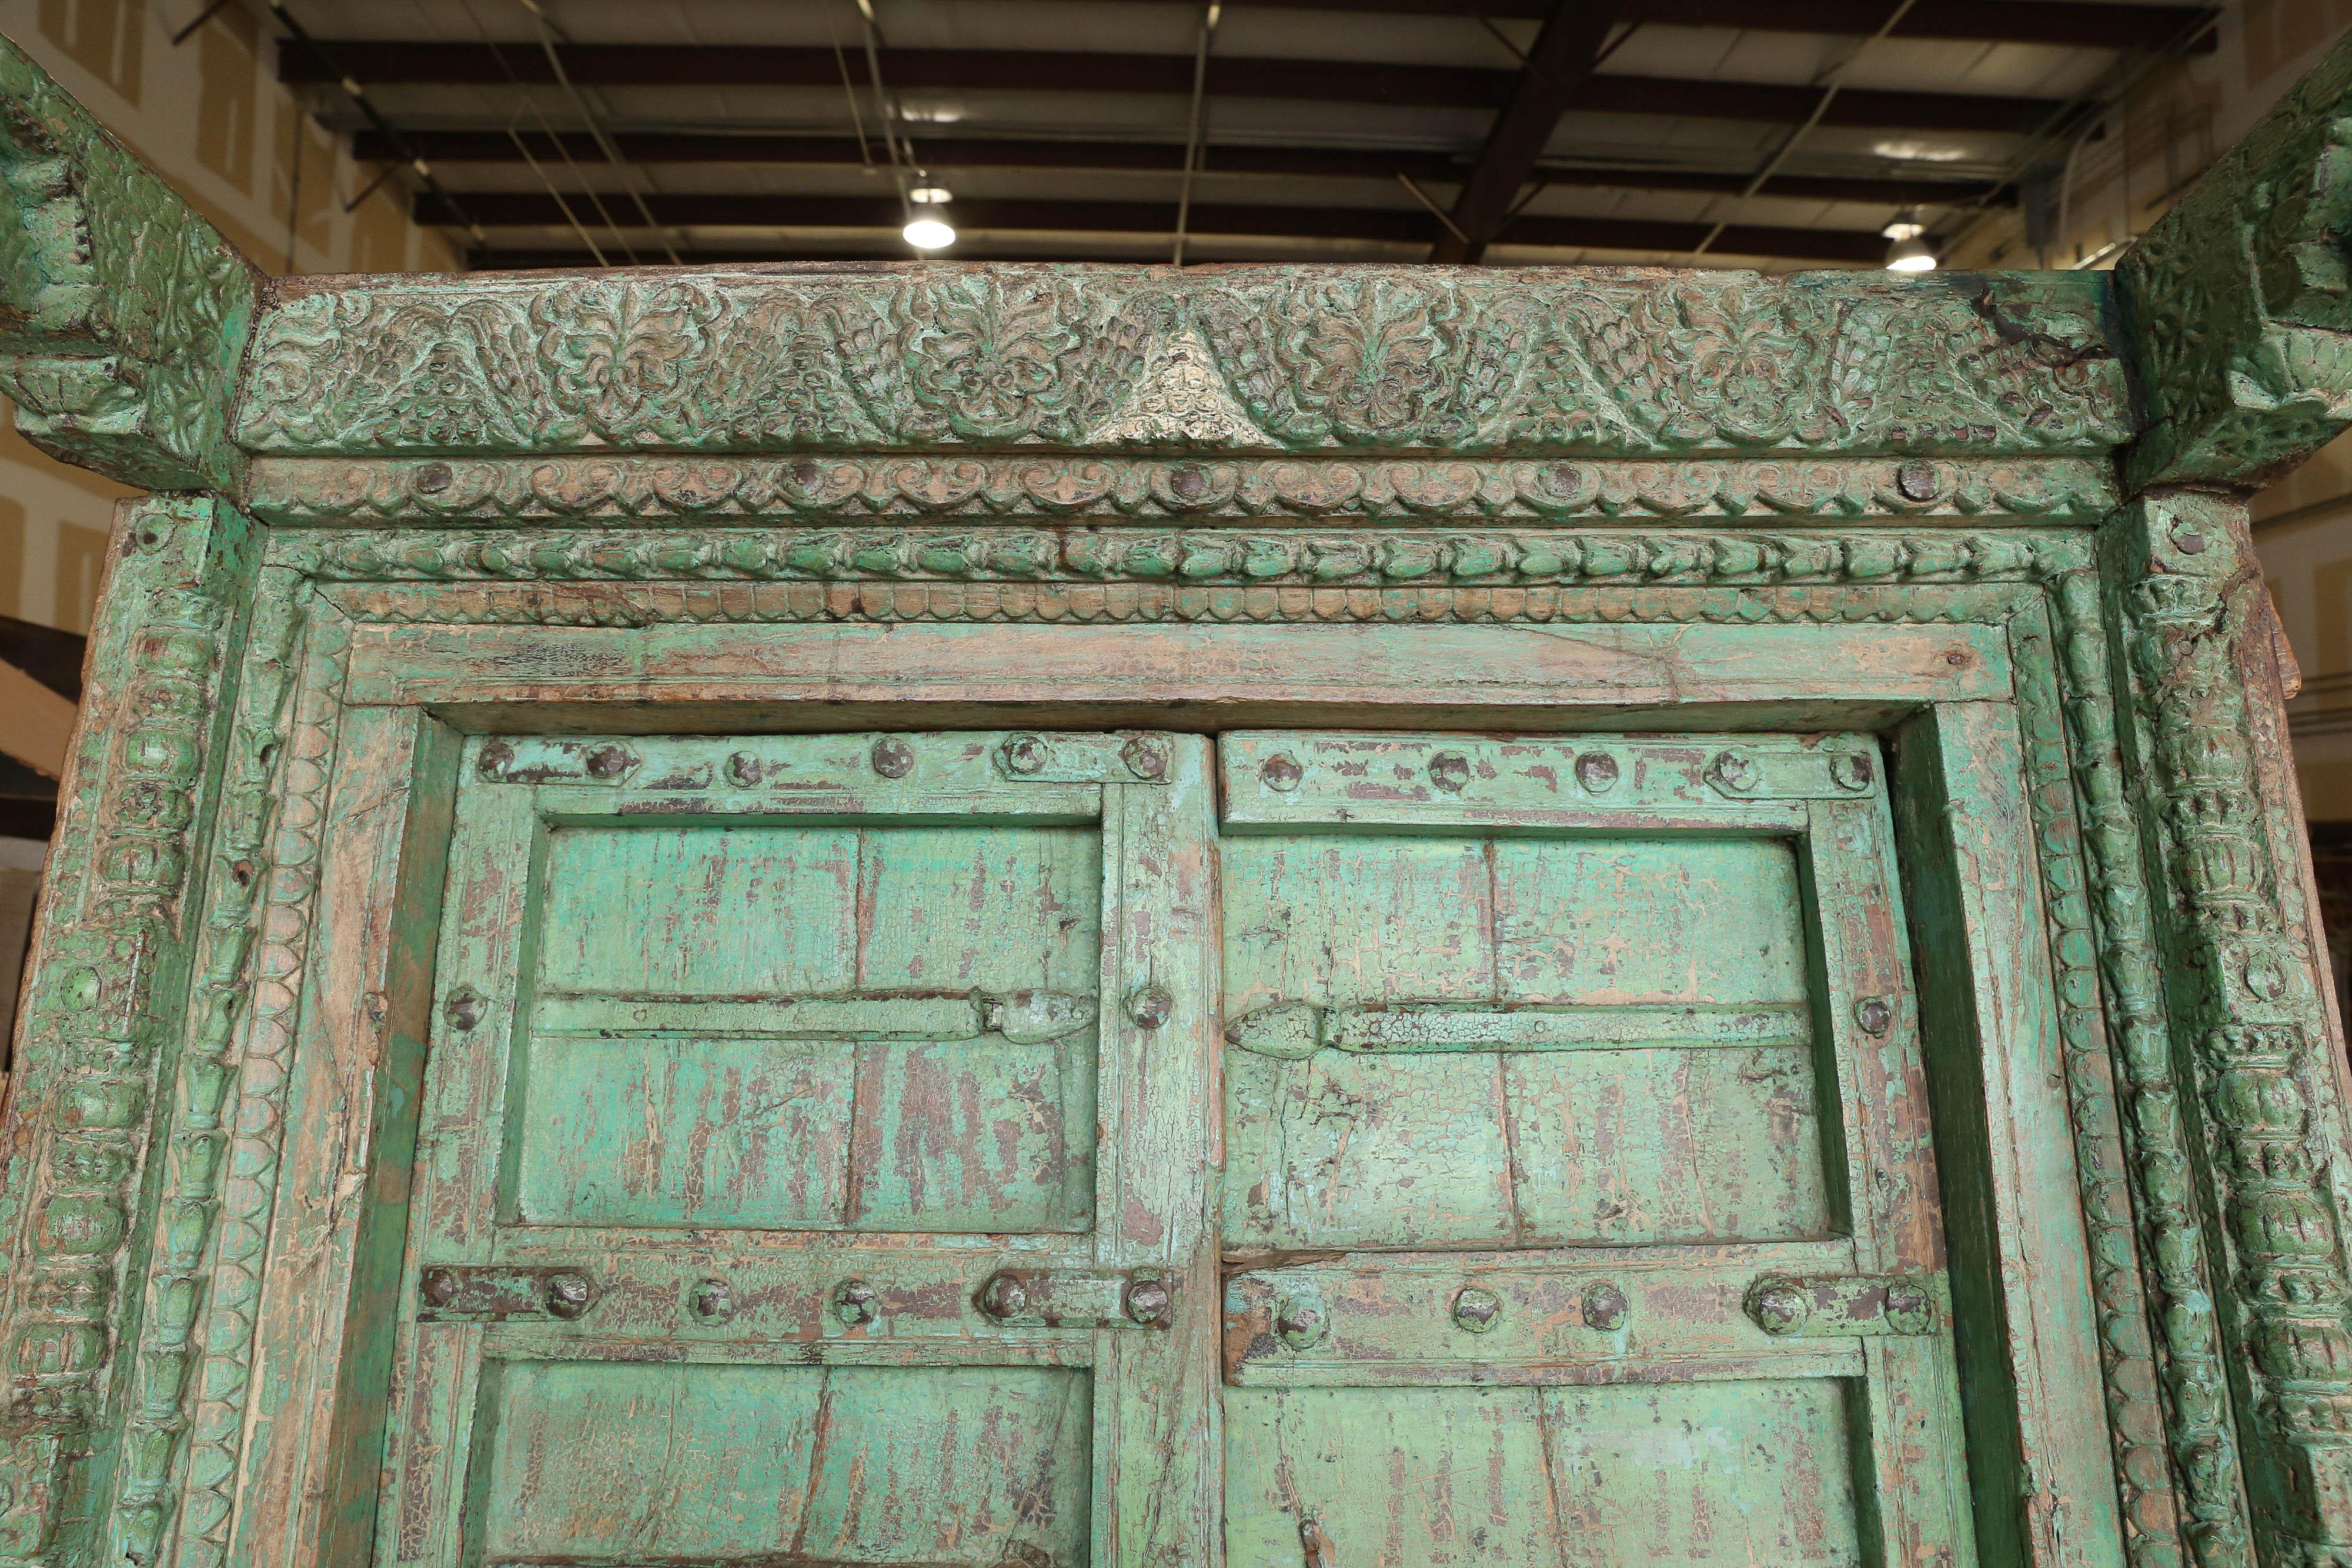 Hand-Crafted 1810s Solid Teak Wood Painted Interior Door from a Prominent Farm House in Goa